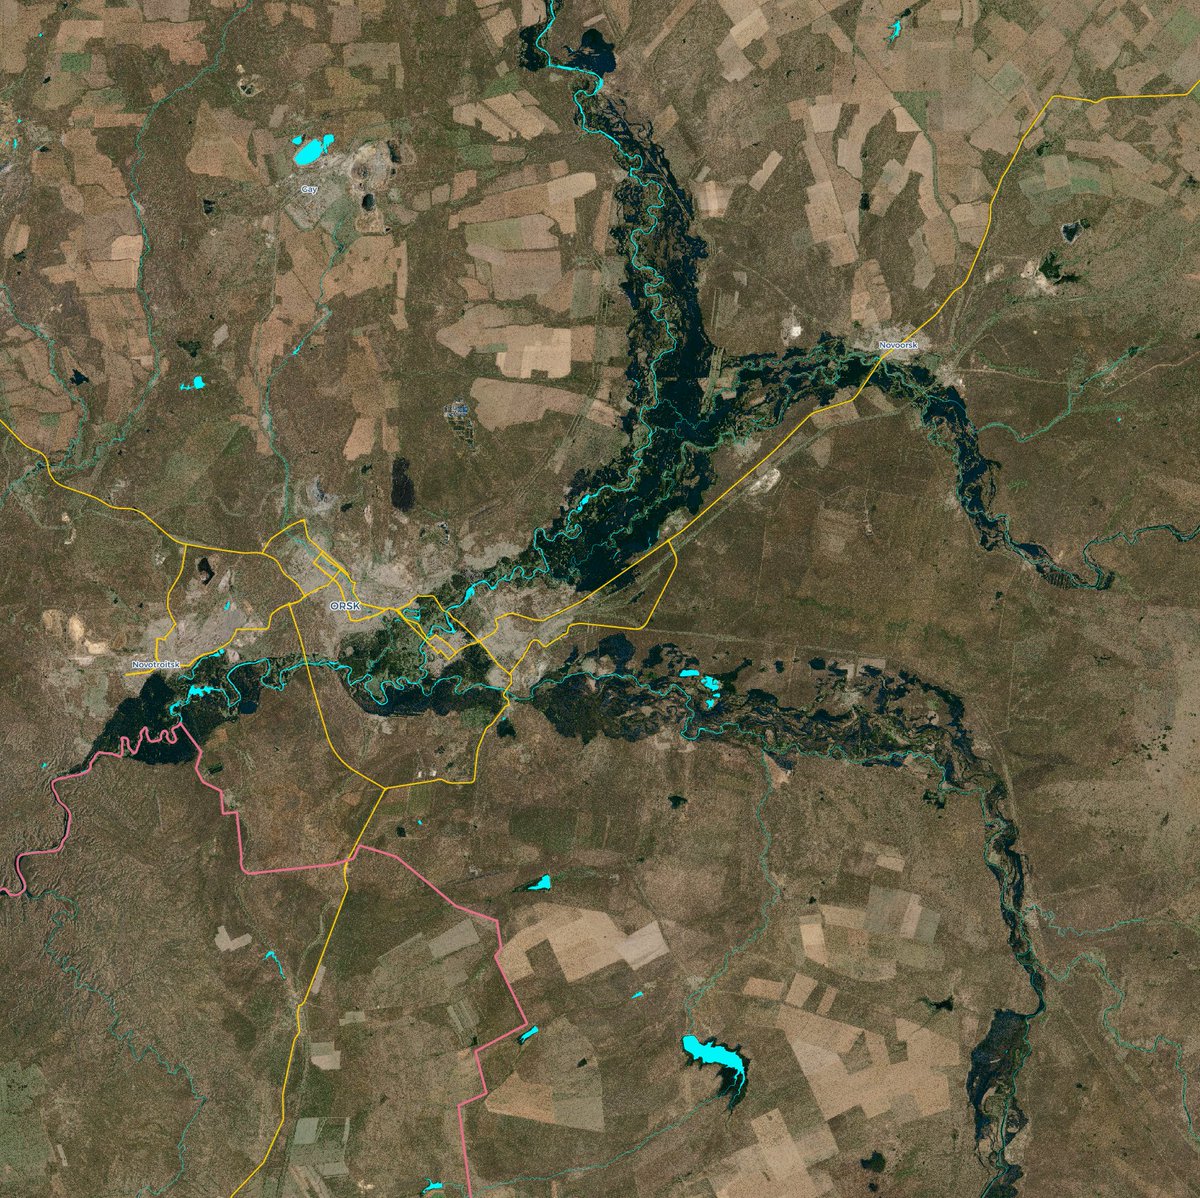 Another graphic, which we ended up not including in the piece, shows the water levels detected by Sentinel-1 on April 8 overlayed with Open Streetmap polygons for normal water levels in light blue.